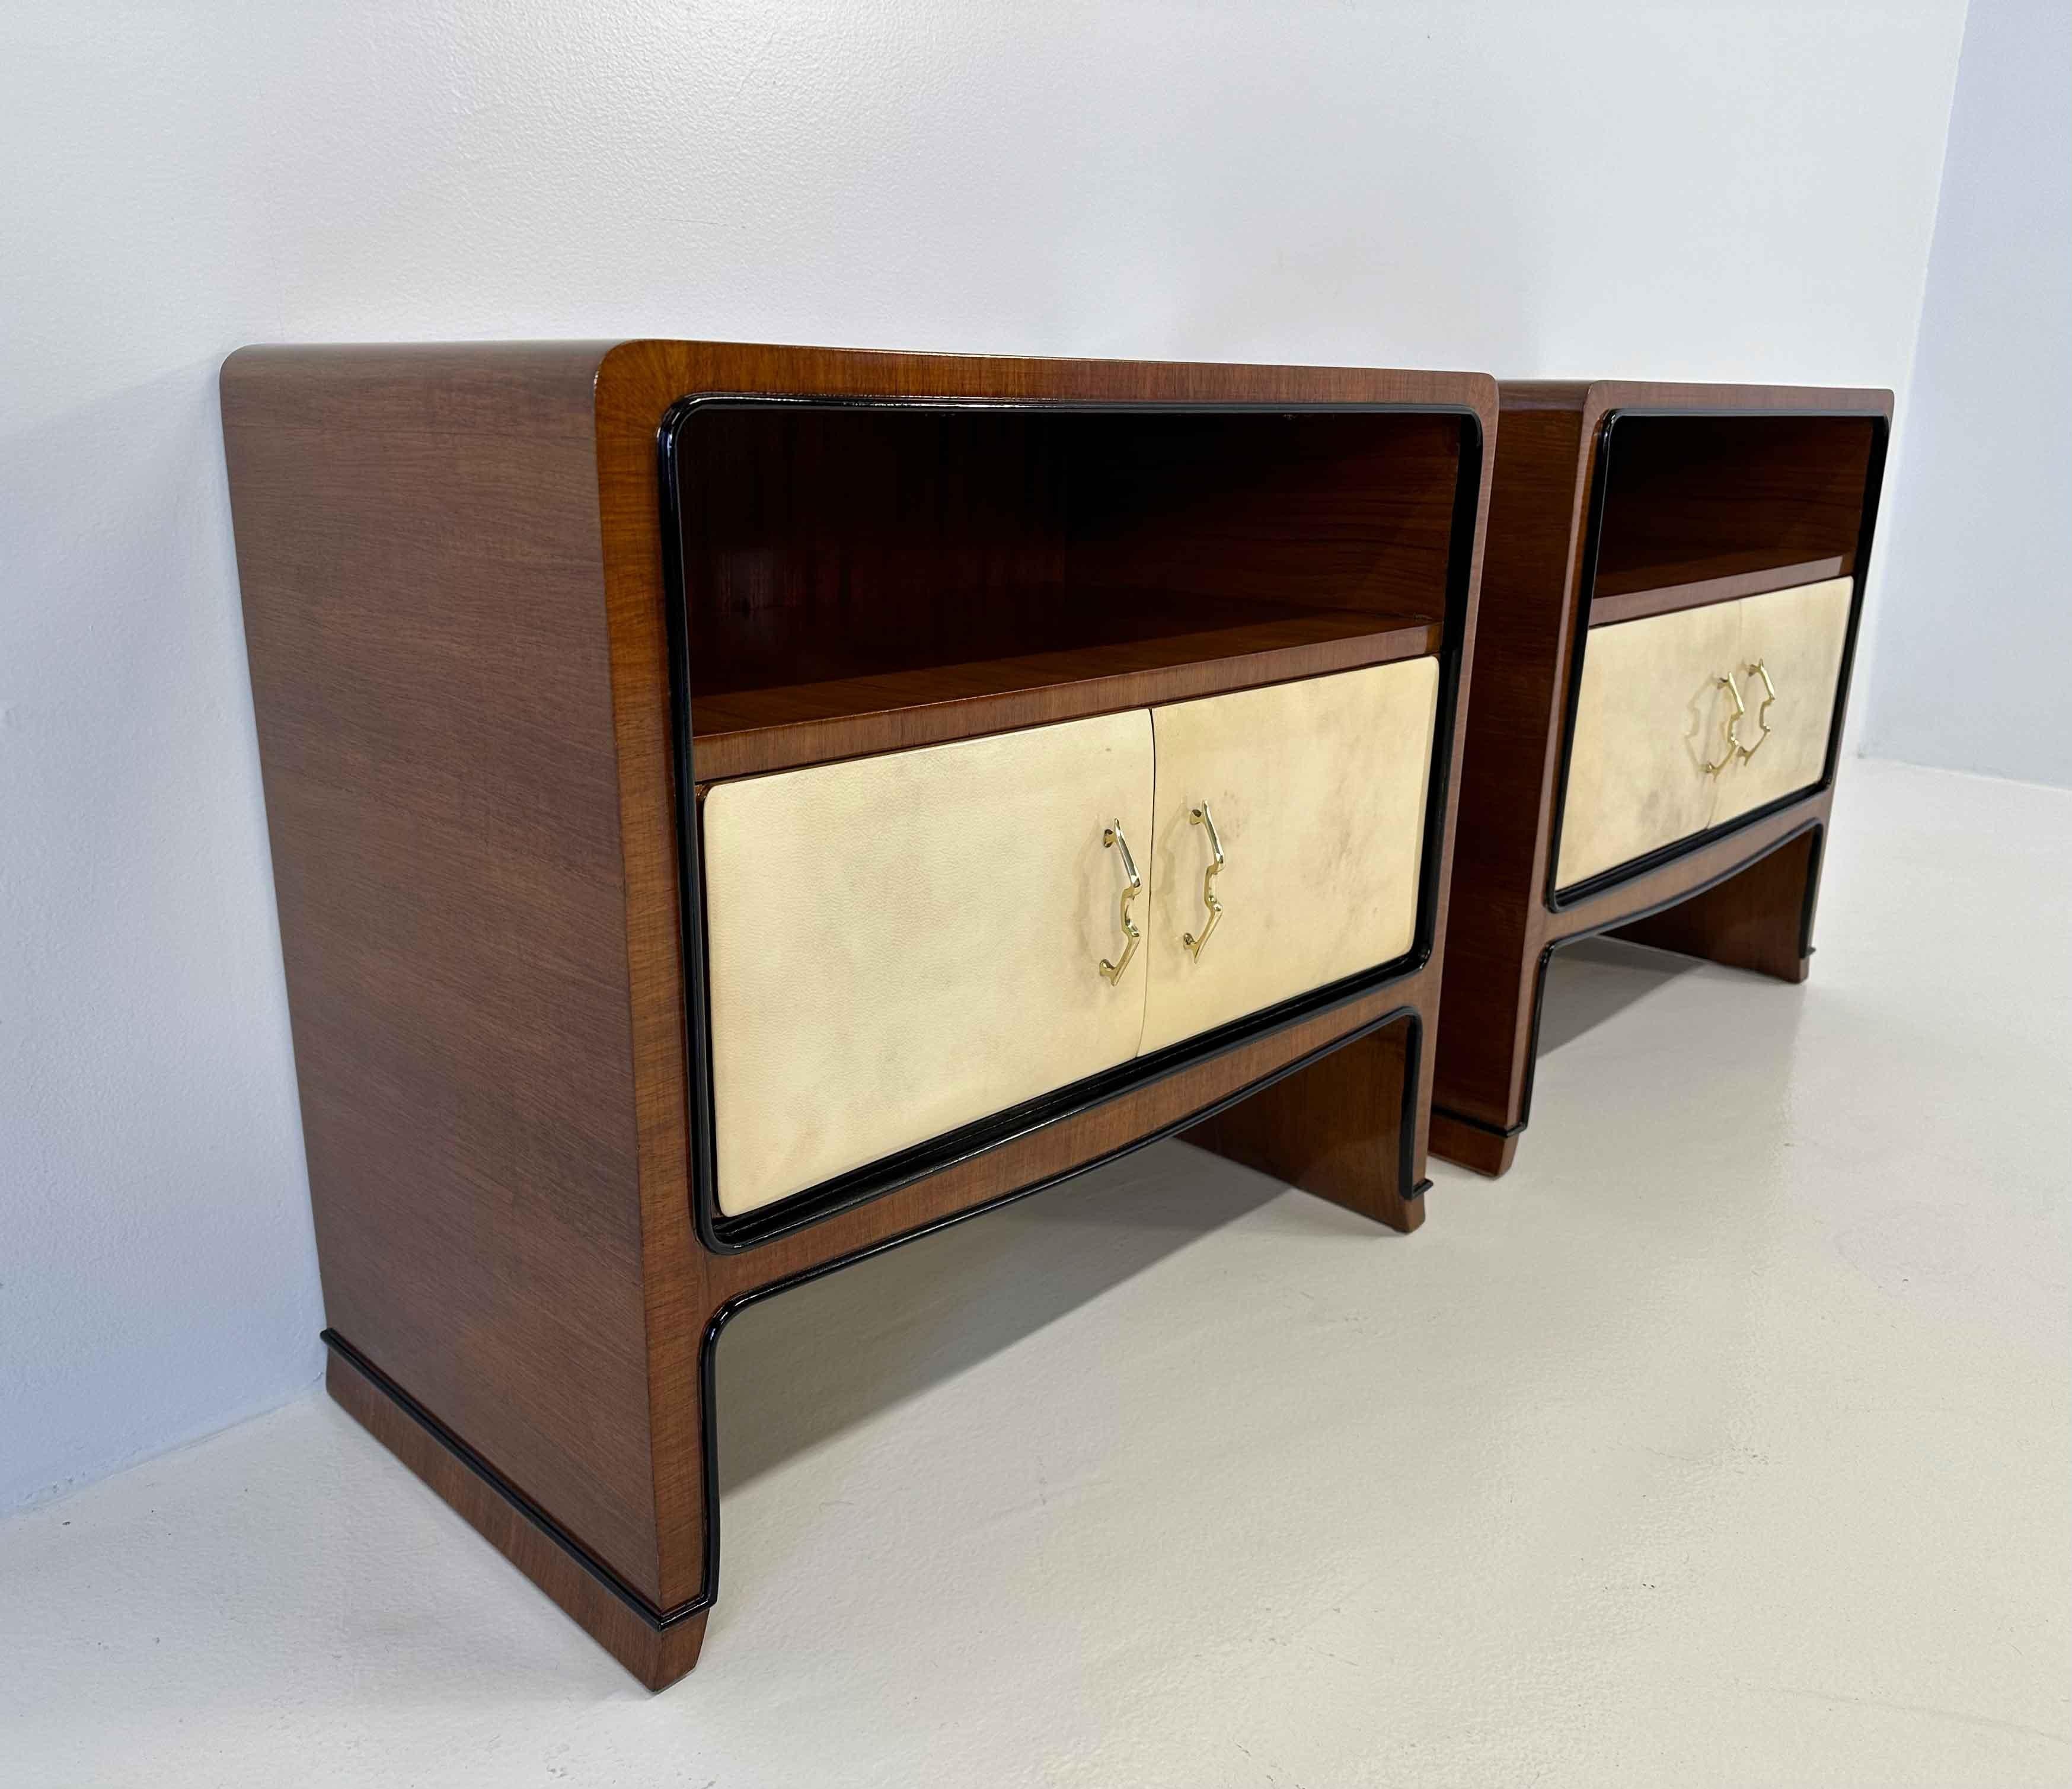 Italian Art Deco Parchment and Walnut Paolo Buffa Nightstands, 1940s For Sale 1